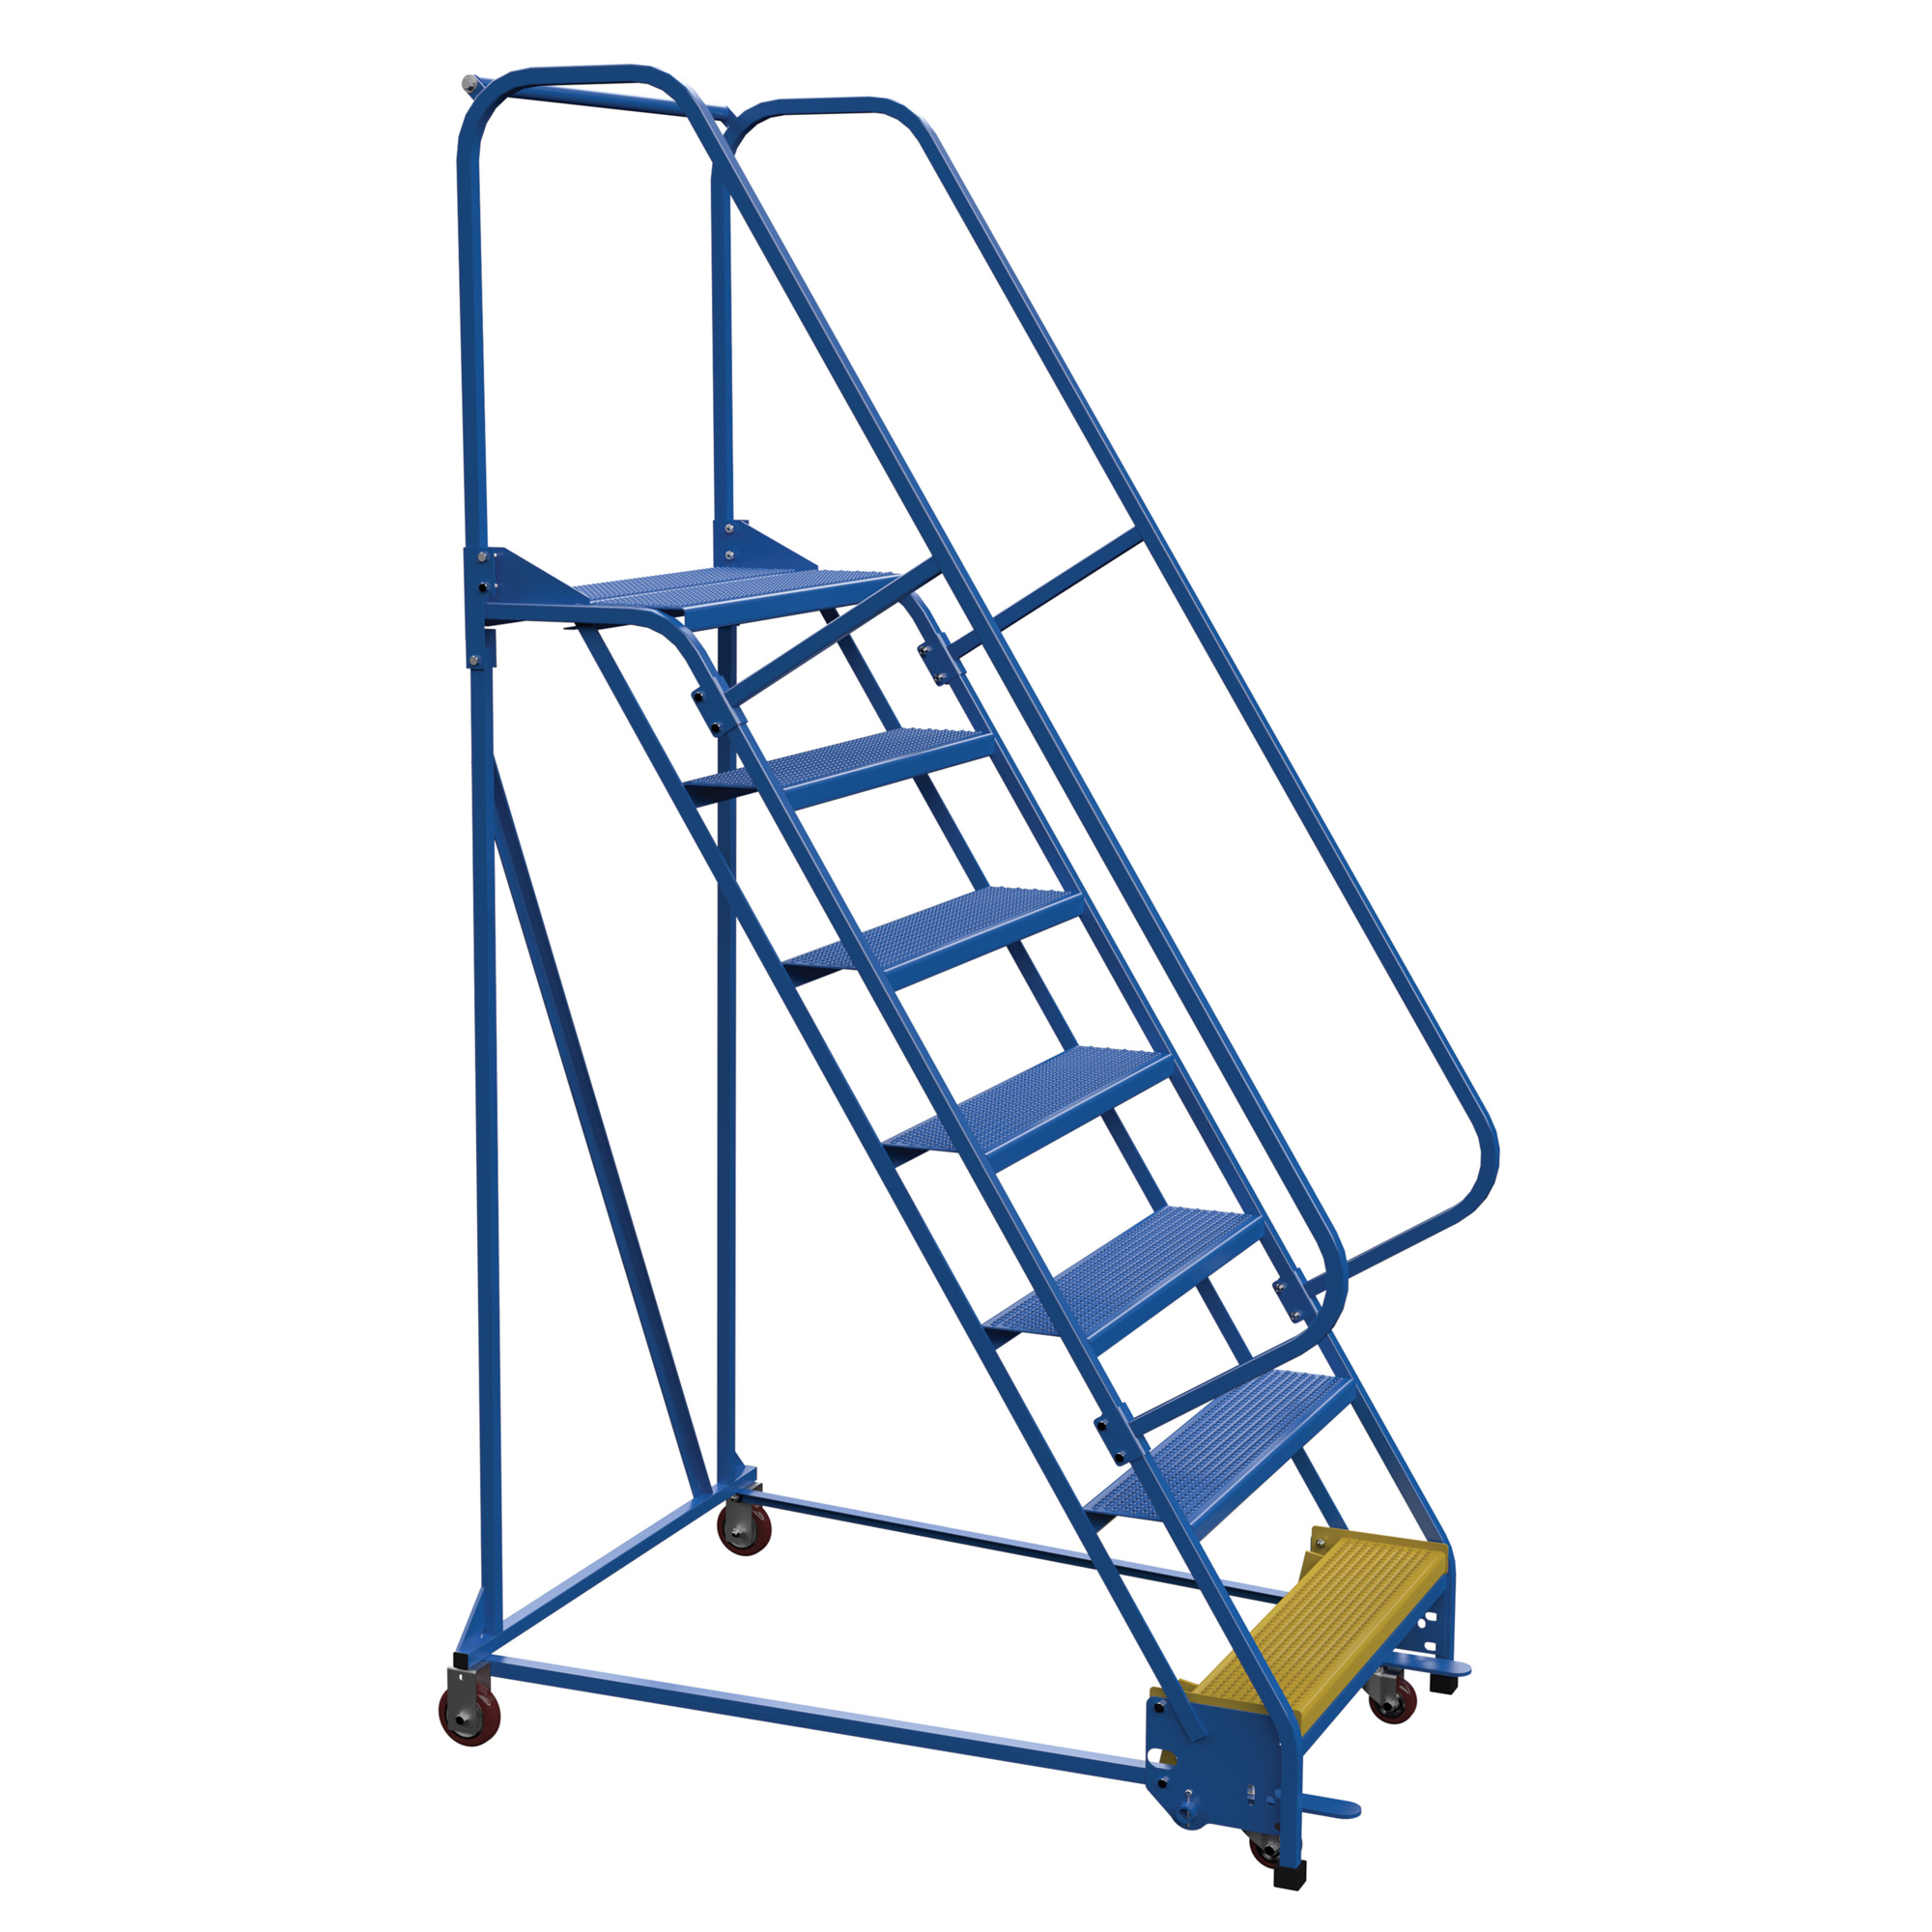 Vestil, 7 Step perforated warehouse ladder, Overall Height 100 in, Steps 7 Material Steel, Model LAD-PW-32-7-P